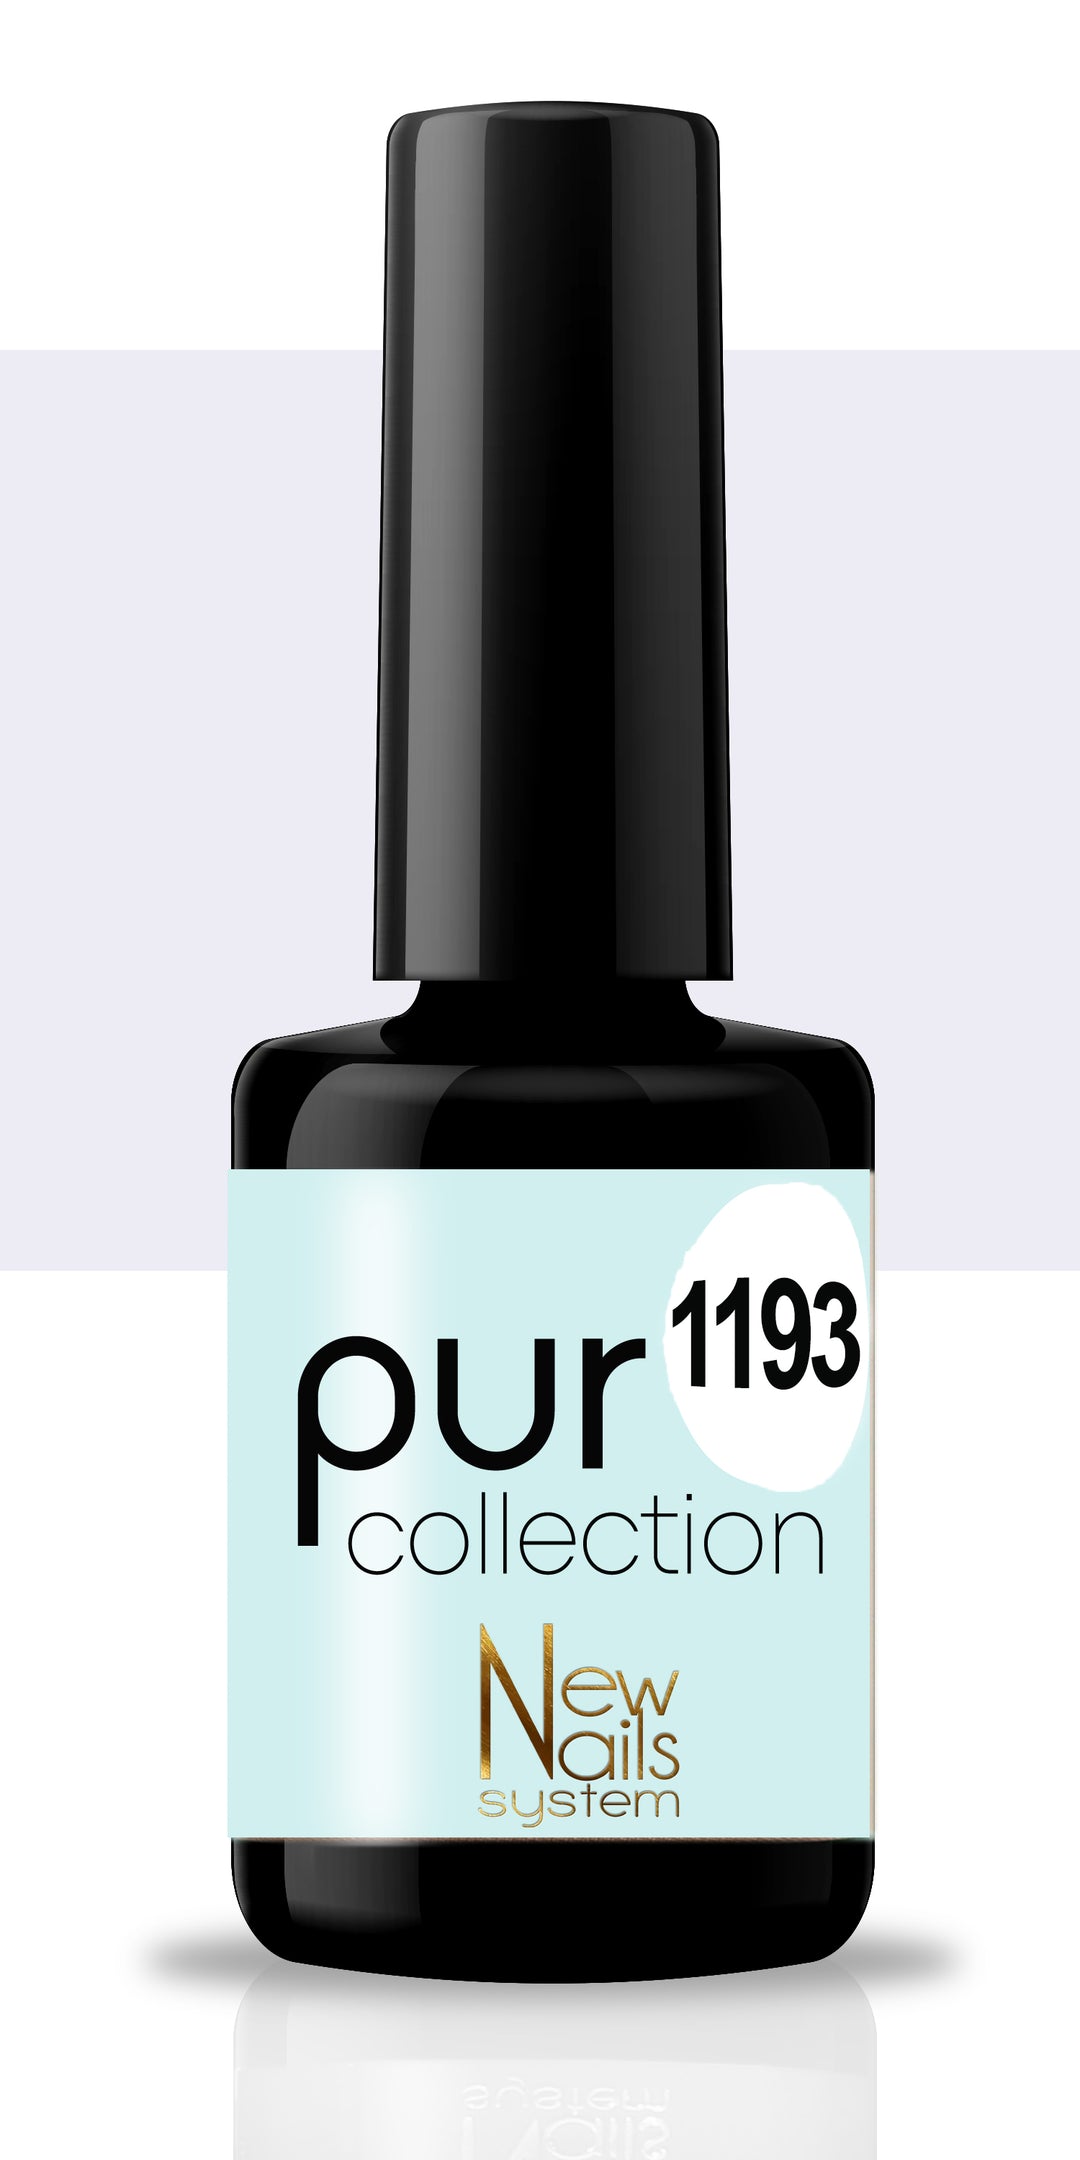 Puro collection 1193 semi-permanent Sweet Pastel color 5ml